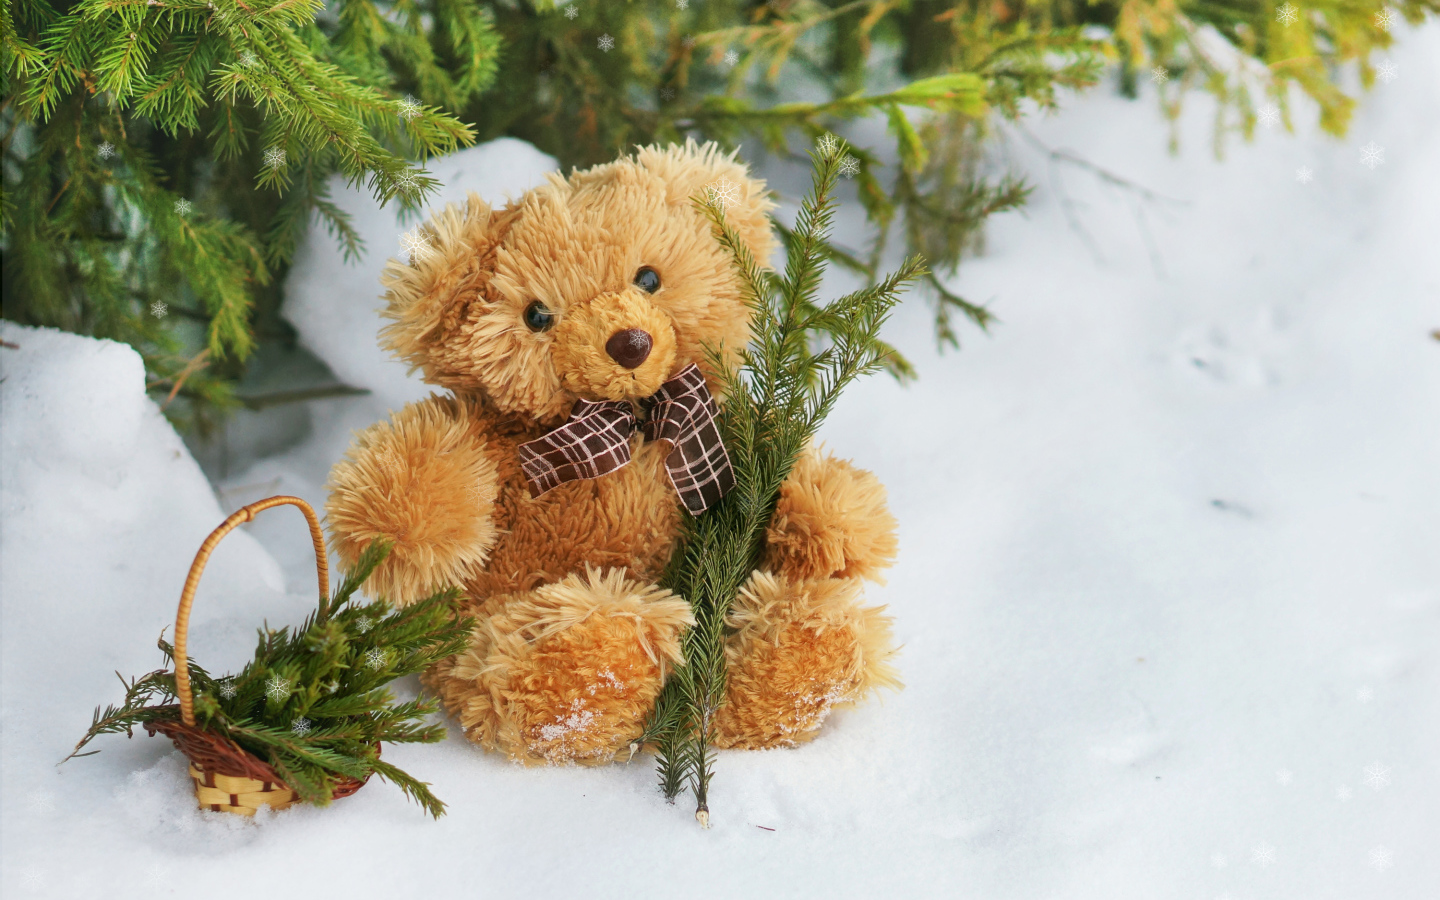 Teddy bear cub in the snow with spruce branches